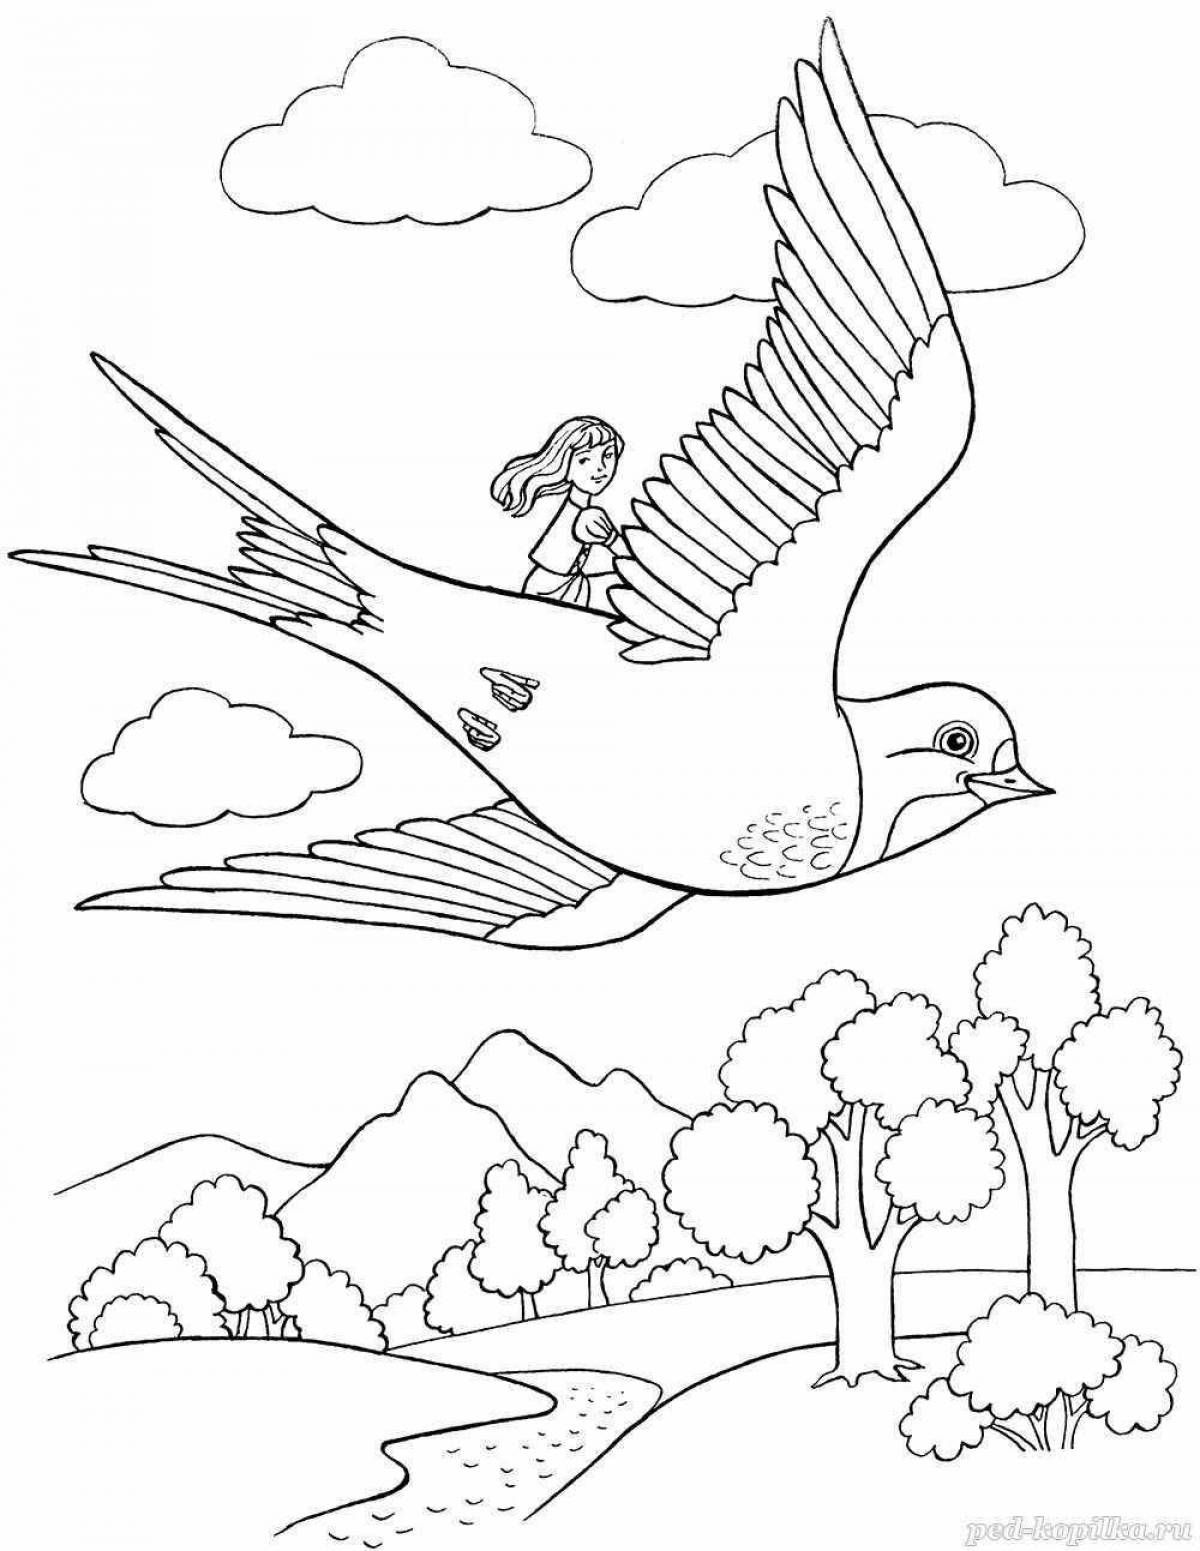 Great coloring book of migratory birds for kids